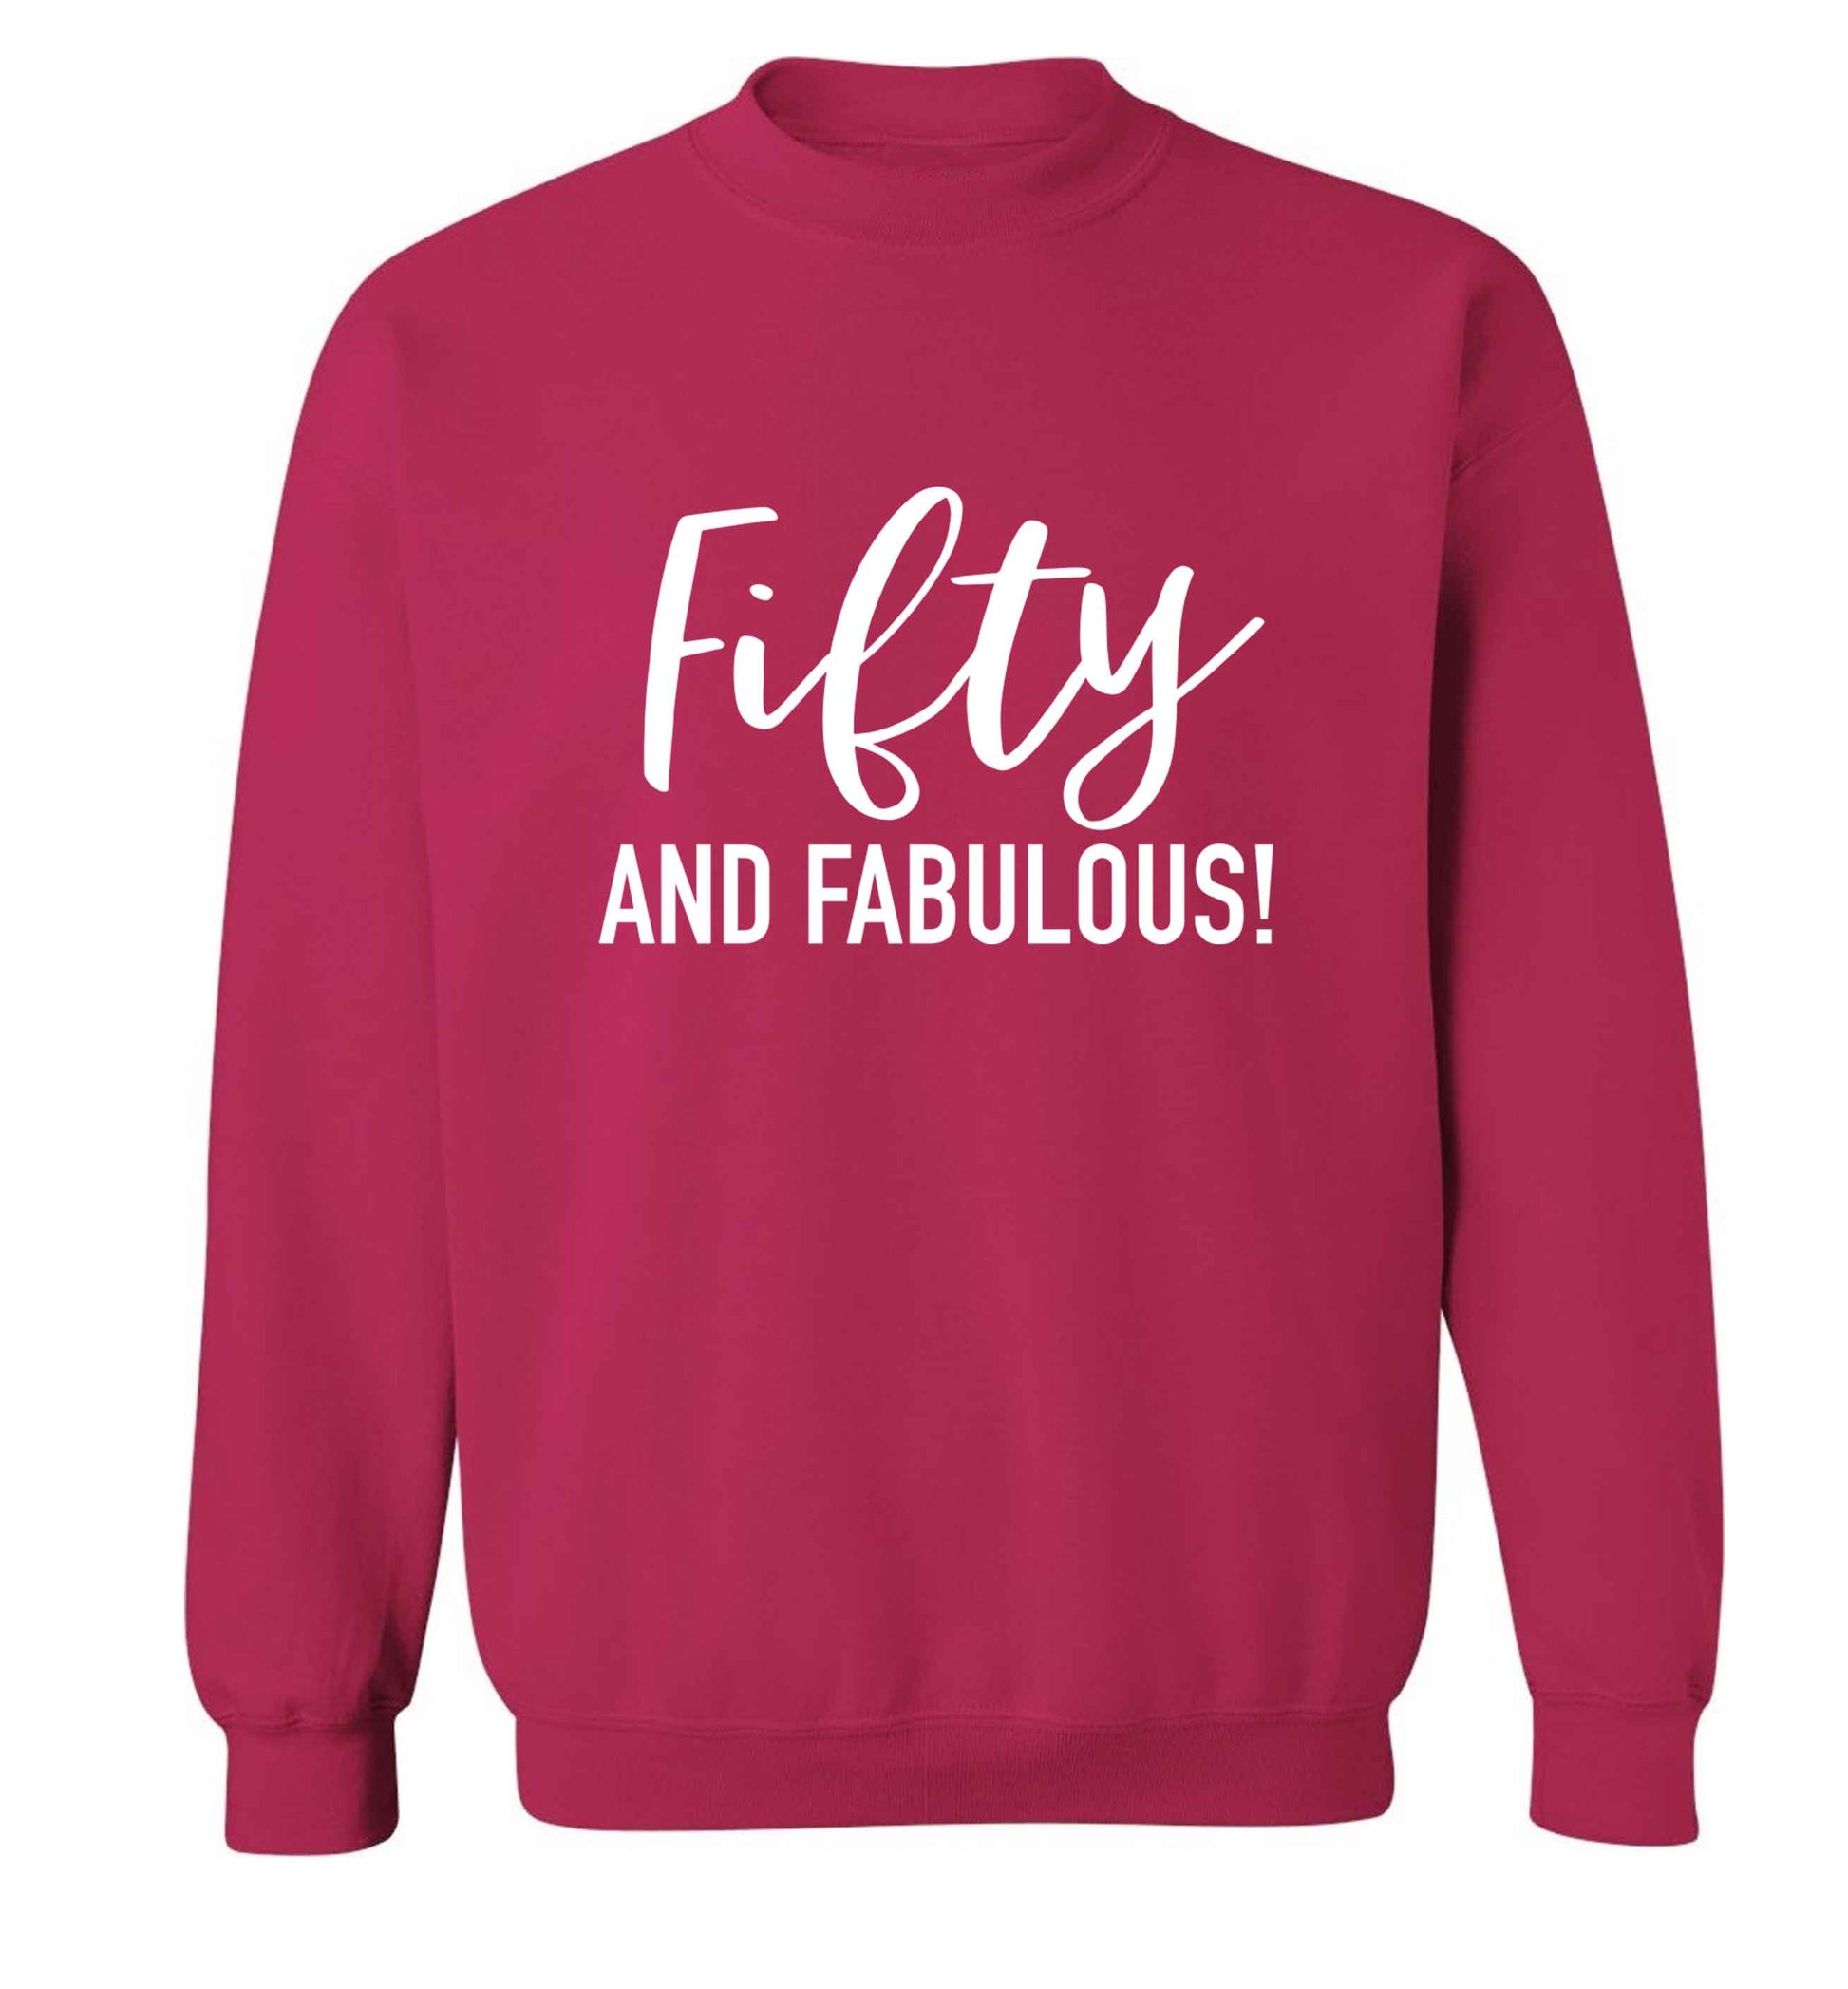 Fifty and fabulous adult's unisex pink sweater 2XL